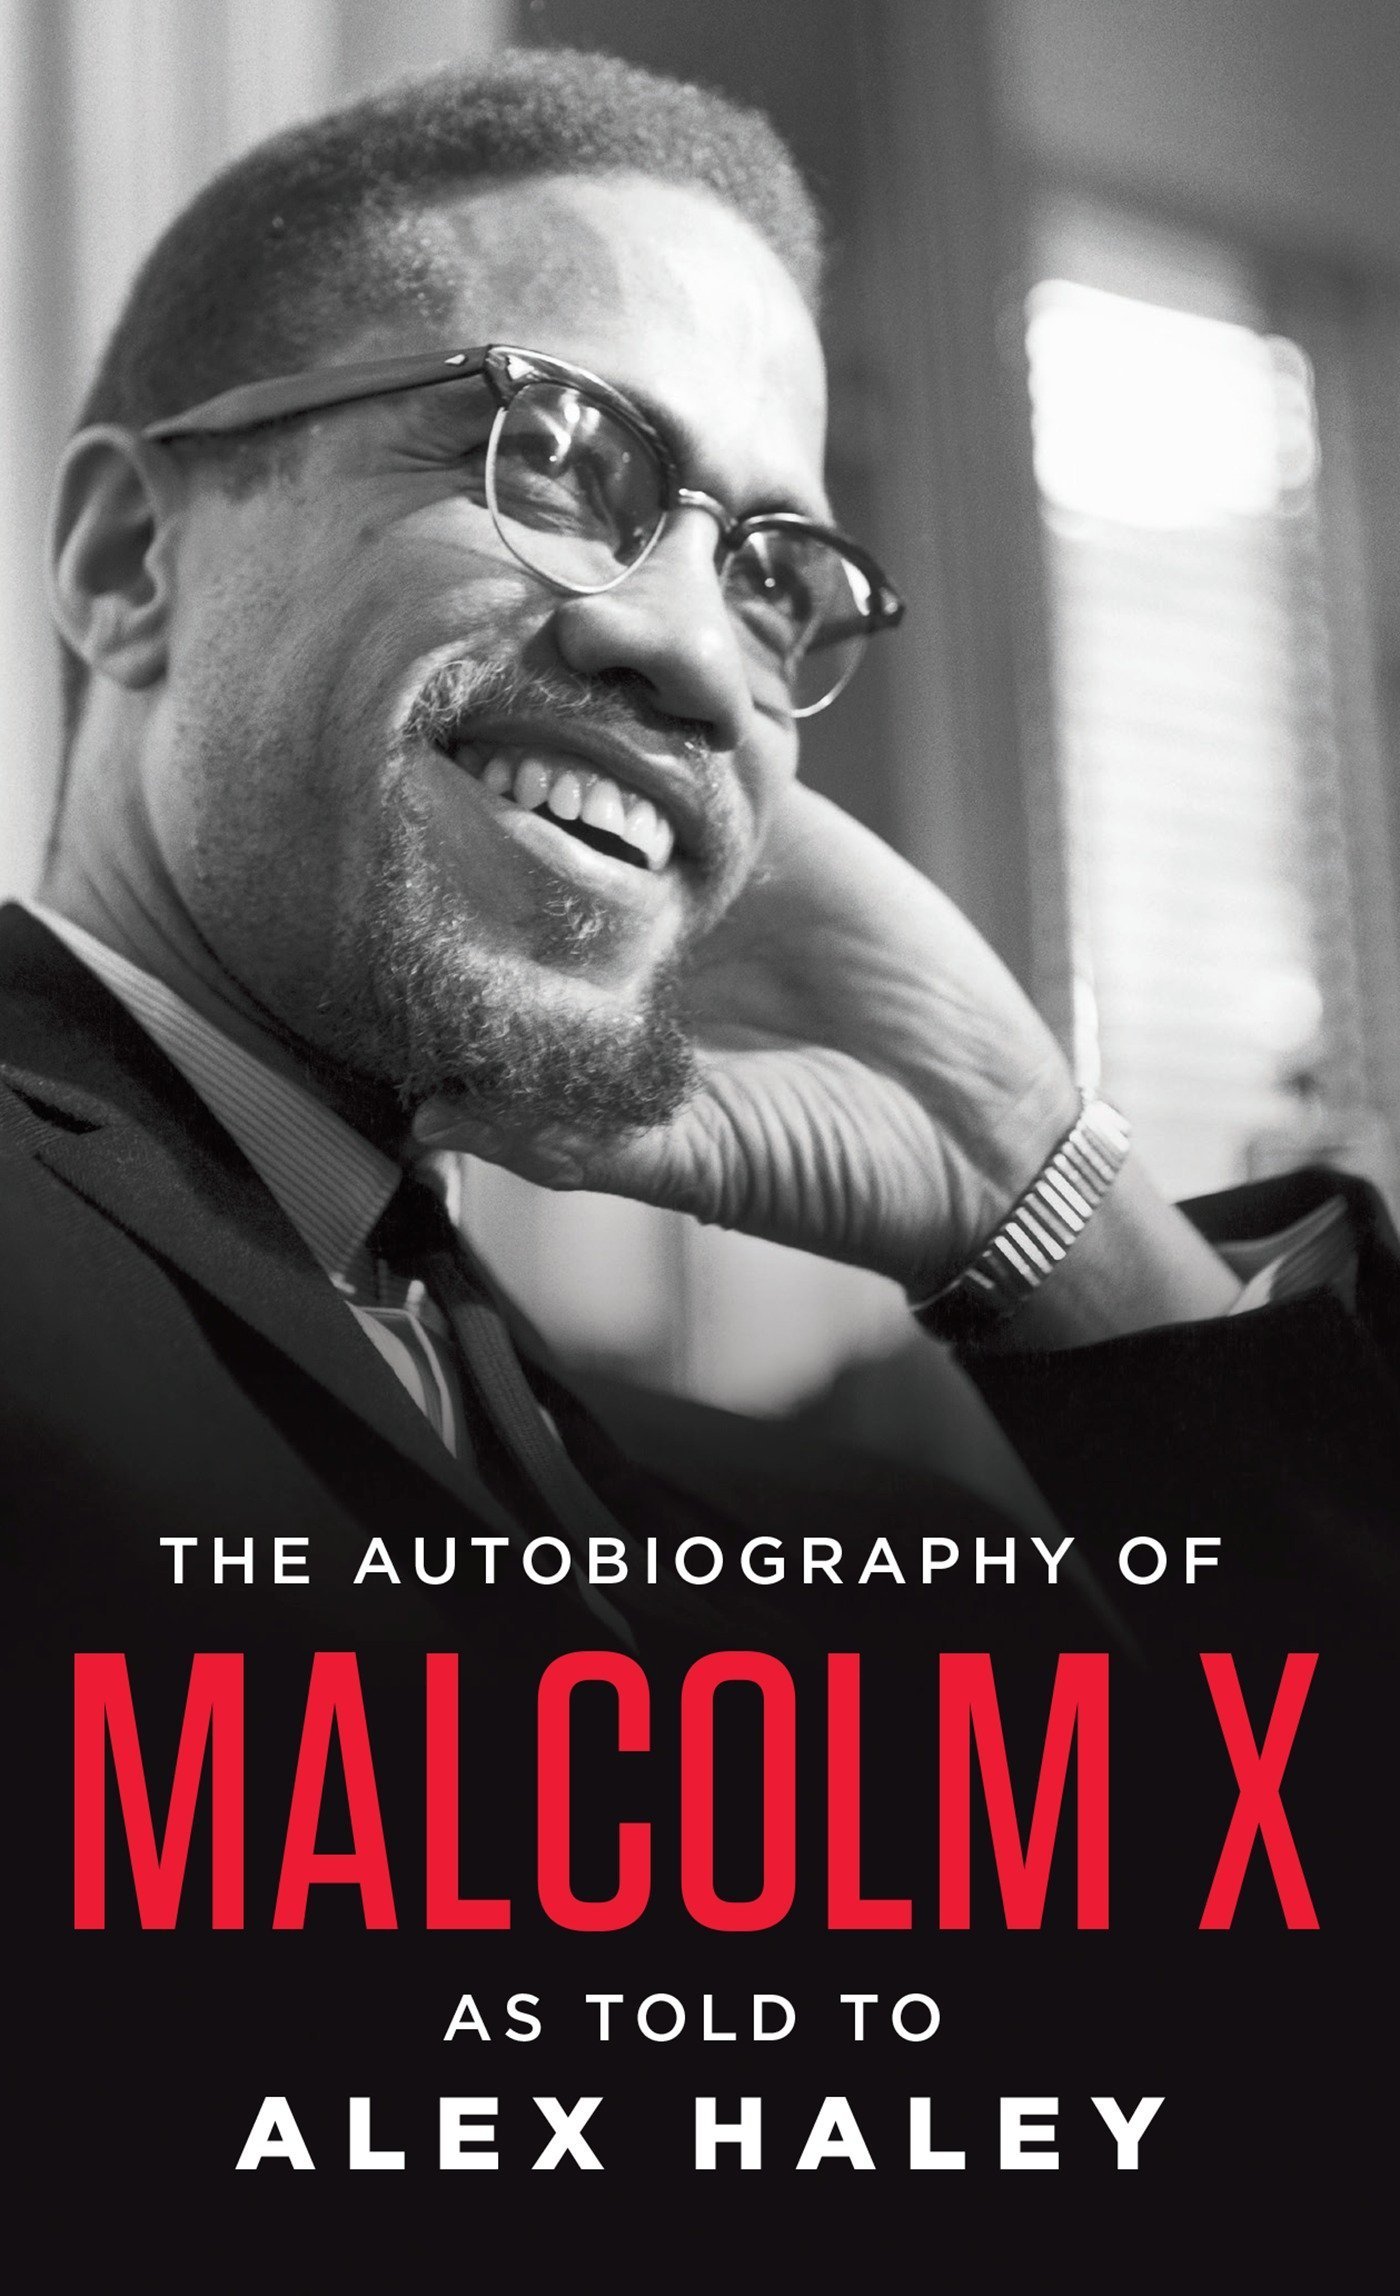 Autobiography of malcolm x audiobook